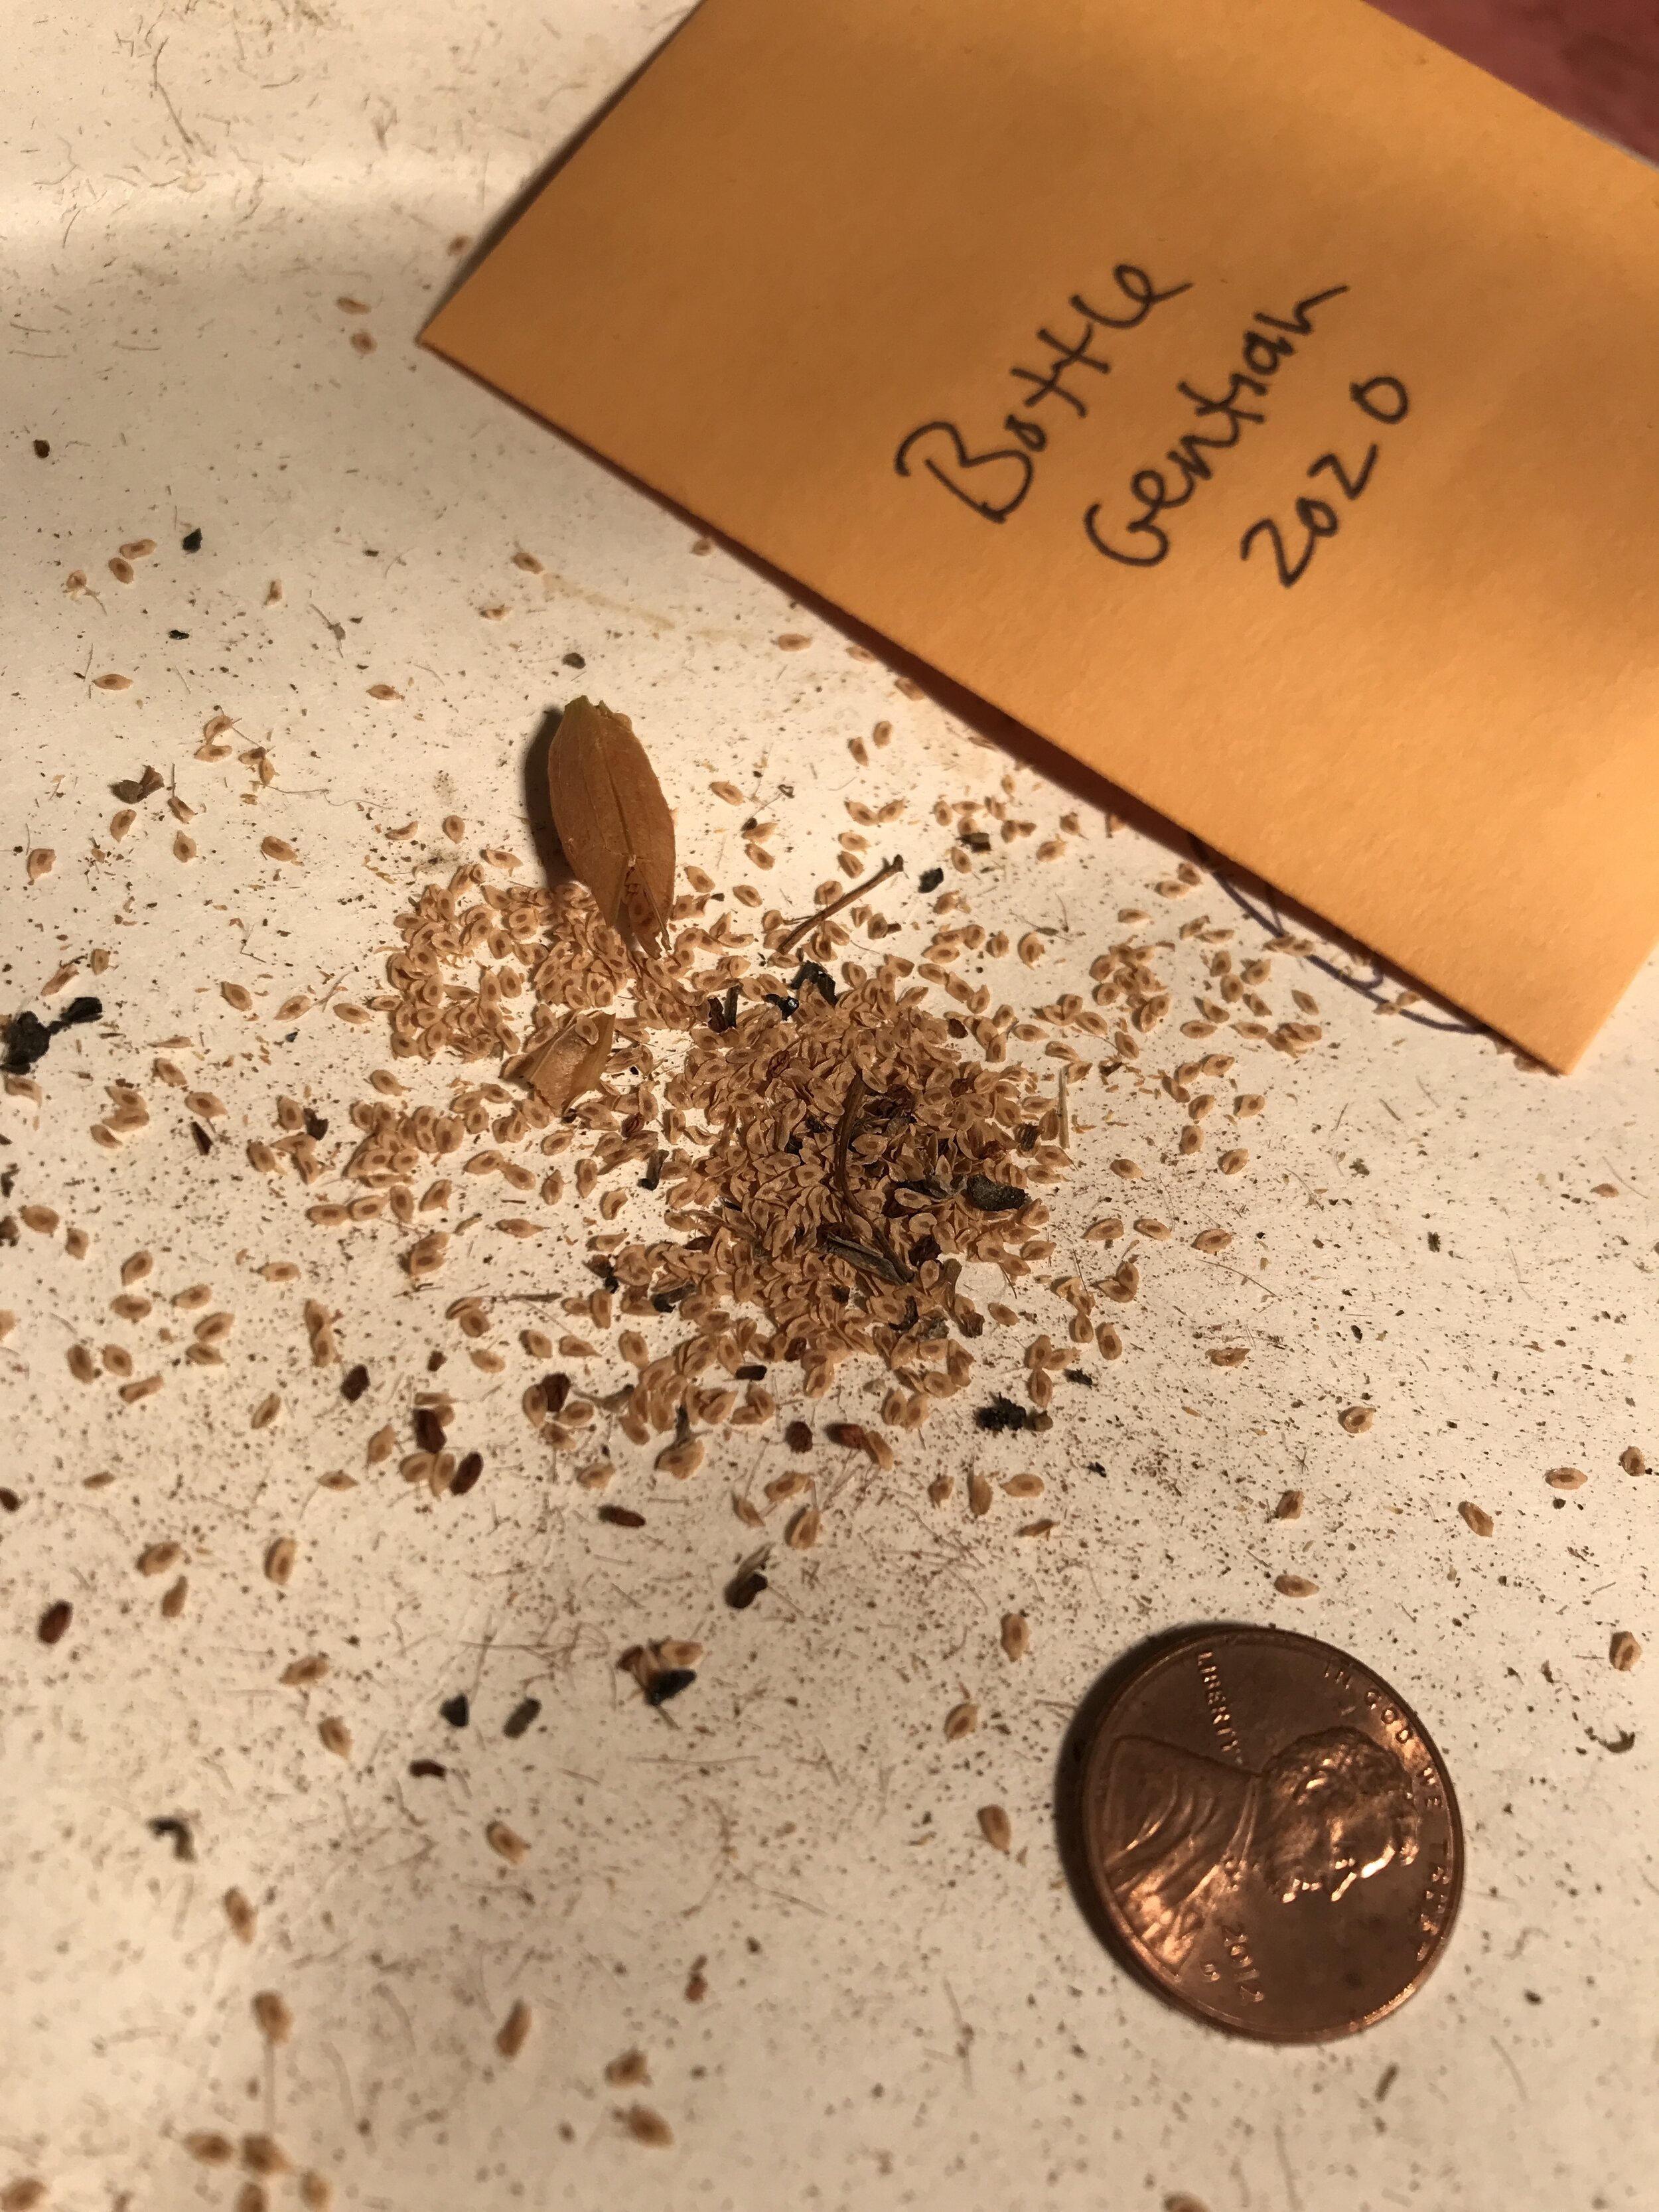 Tiny Bottle Gentian seeds during seed cleaning; Each seed is so unique